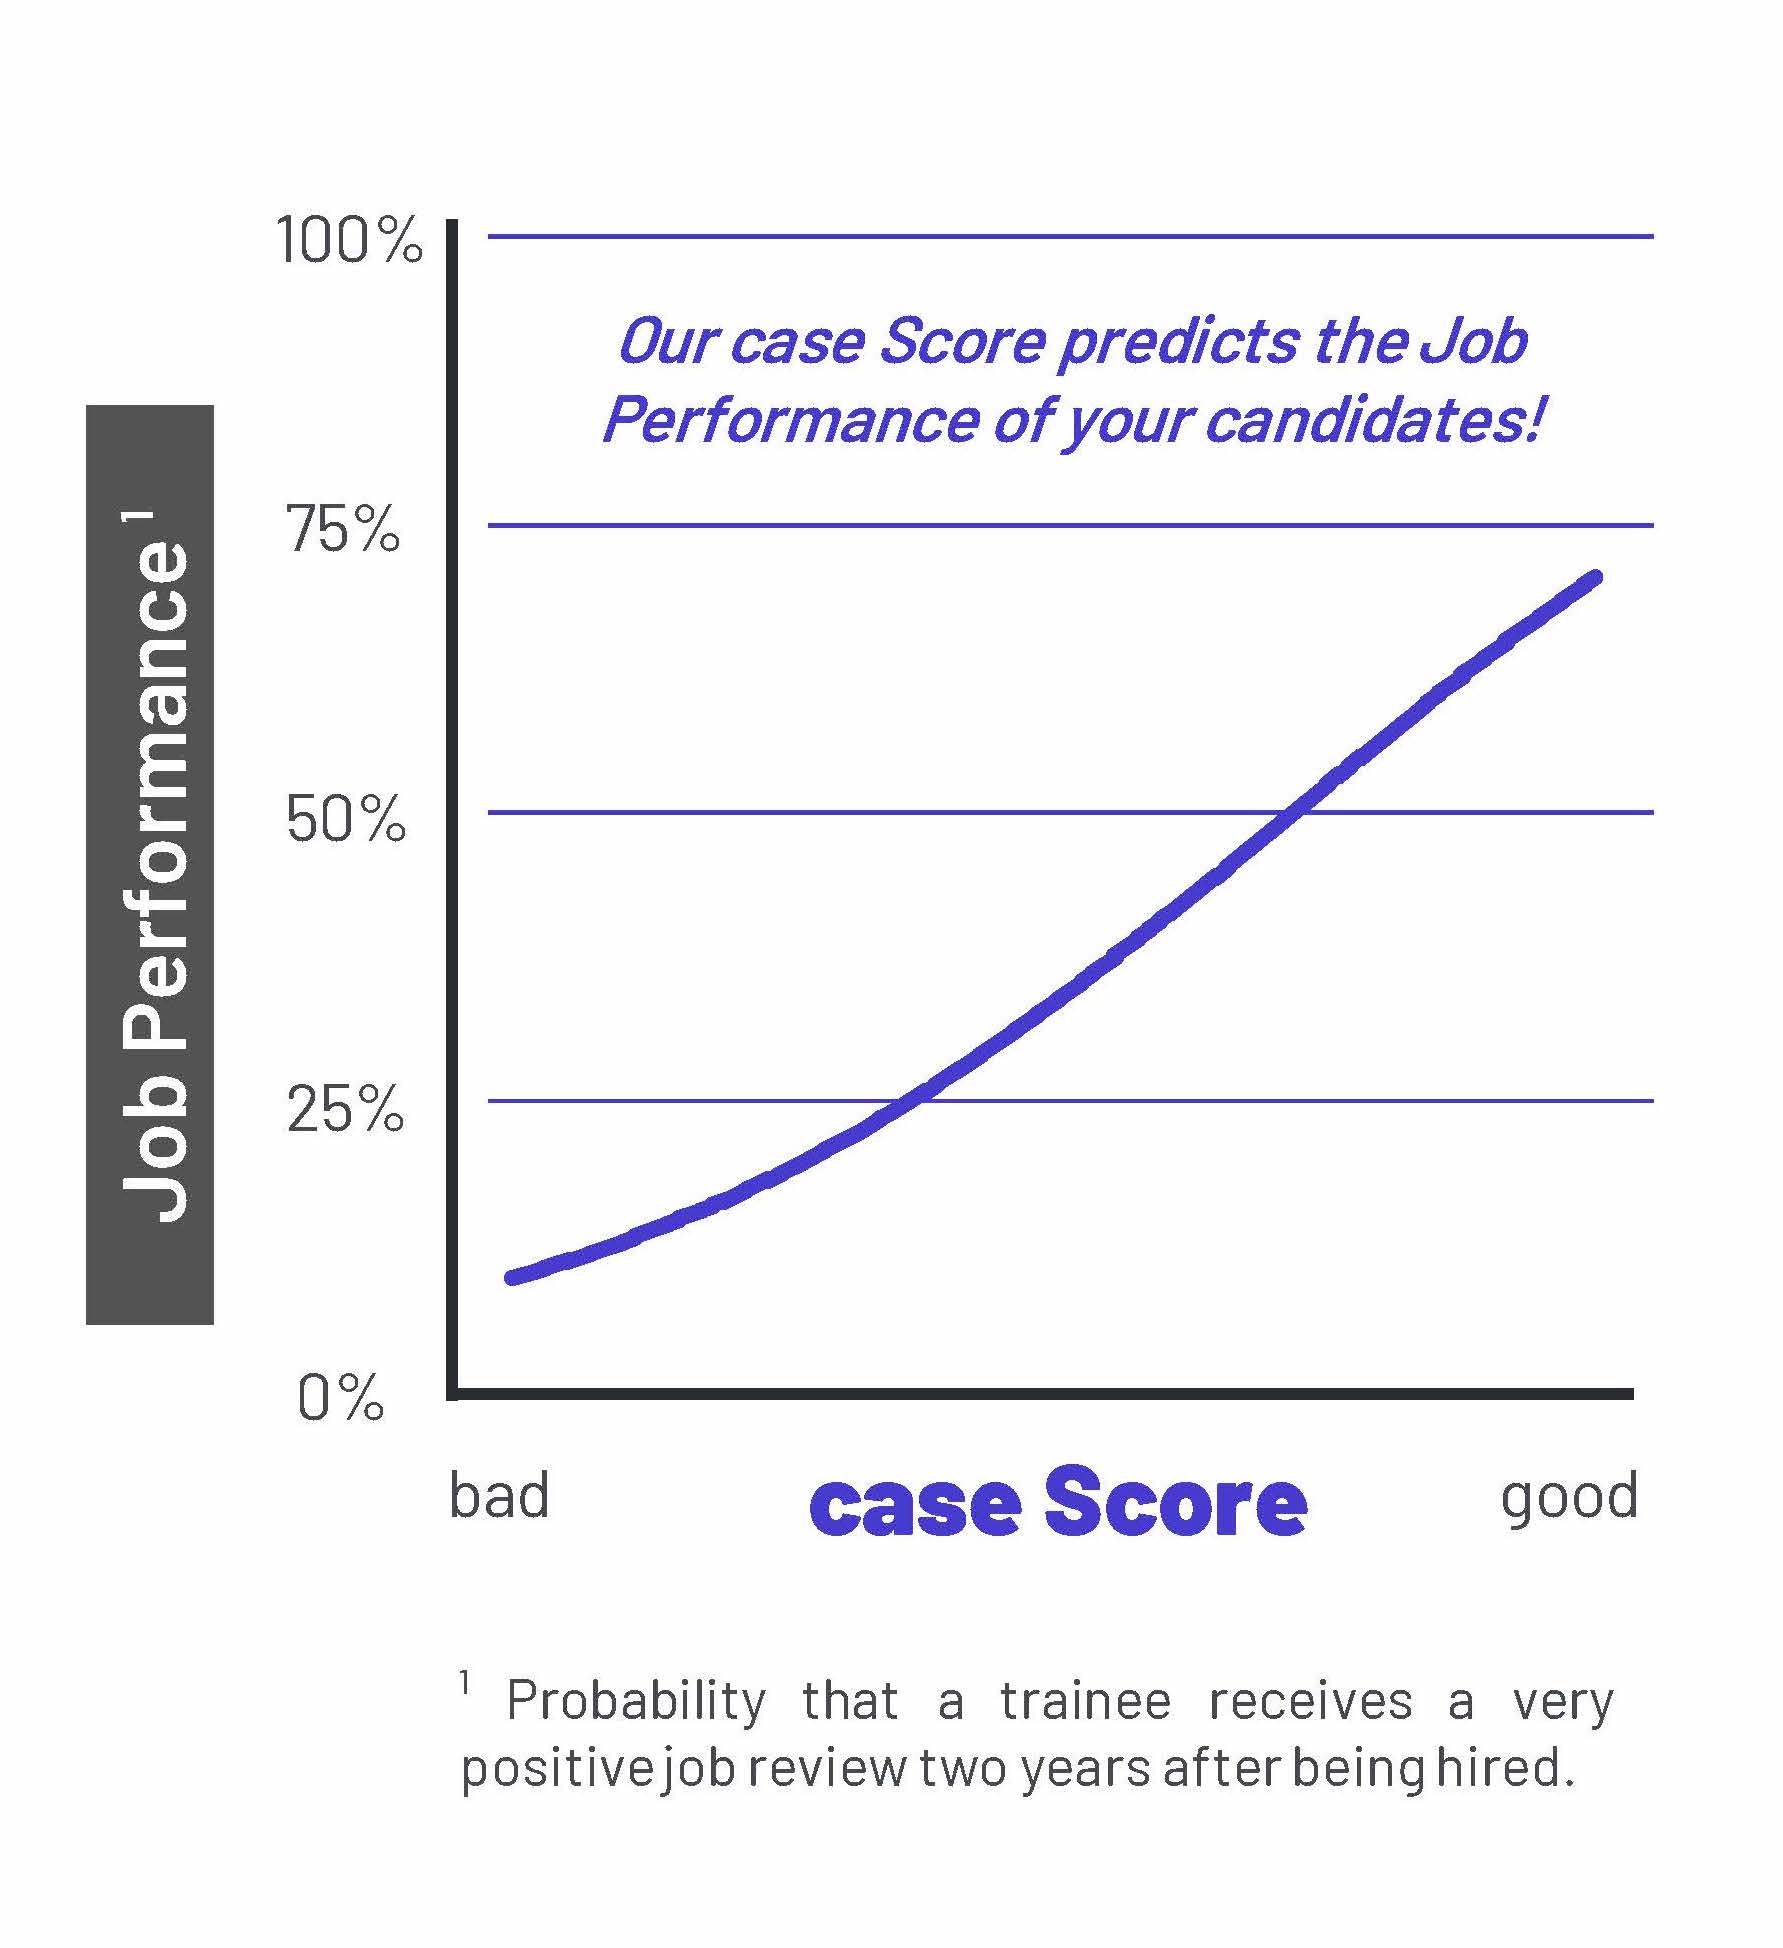 Our Recruiting Algorithm predicts the job performance your candidates